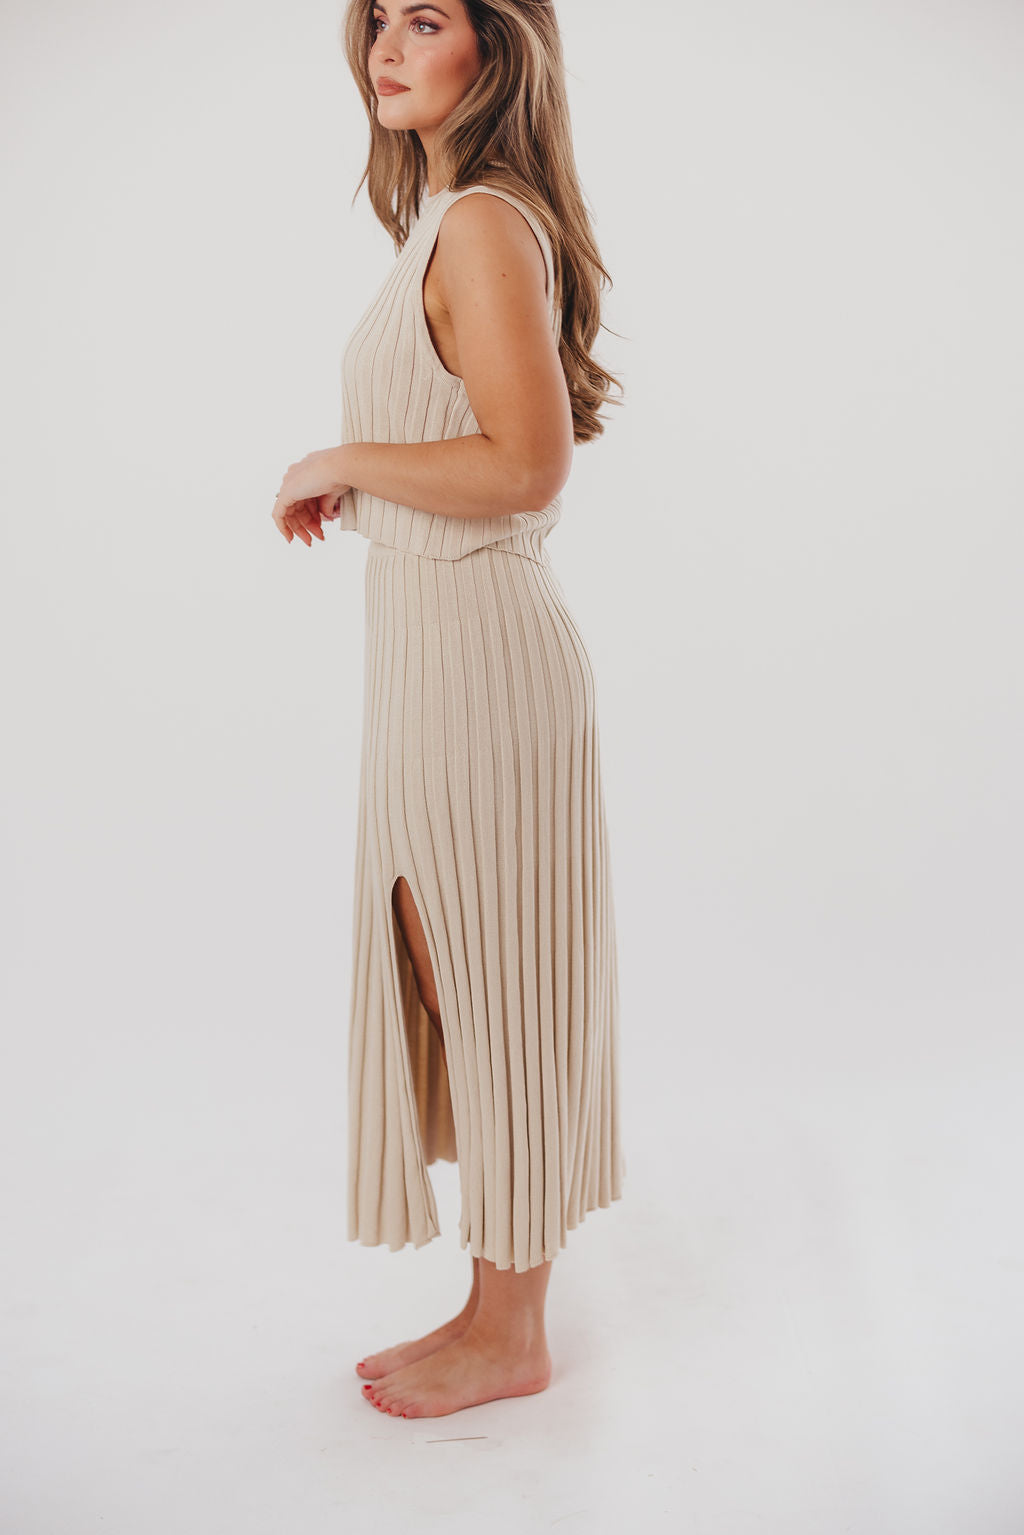 Sydney Knit Tank and Skirt Set in Tan